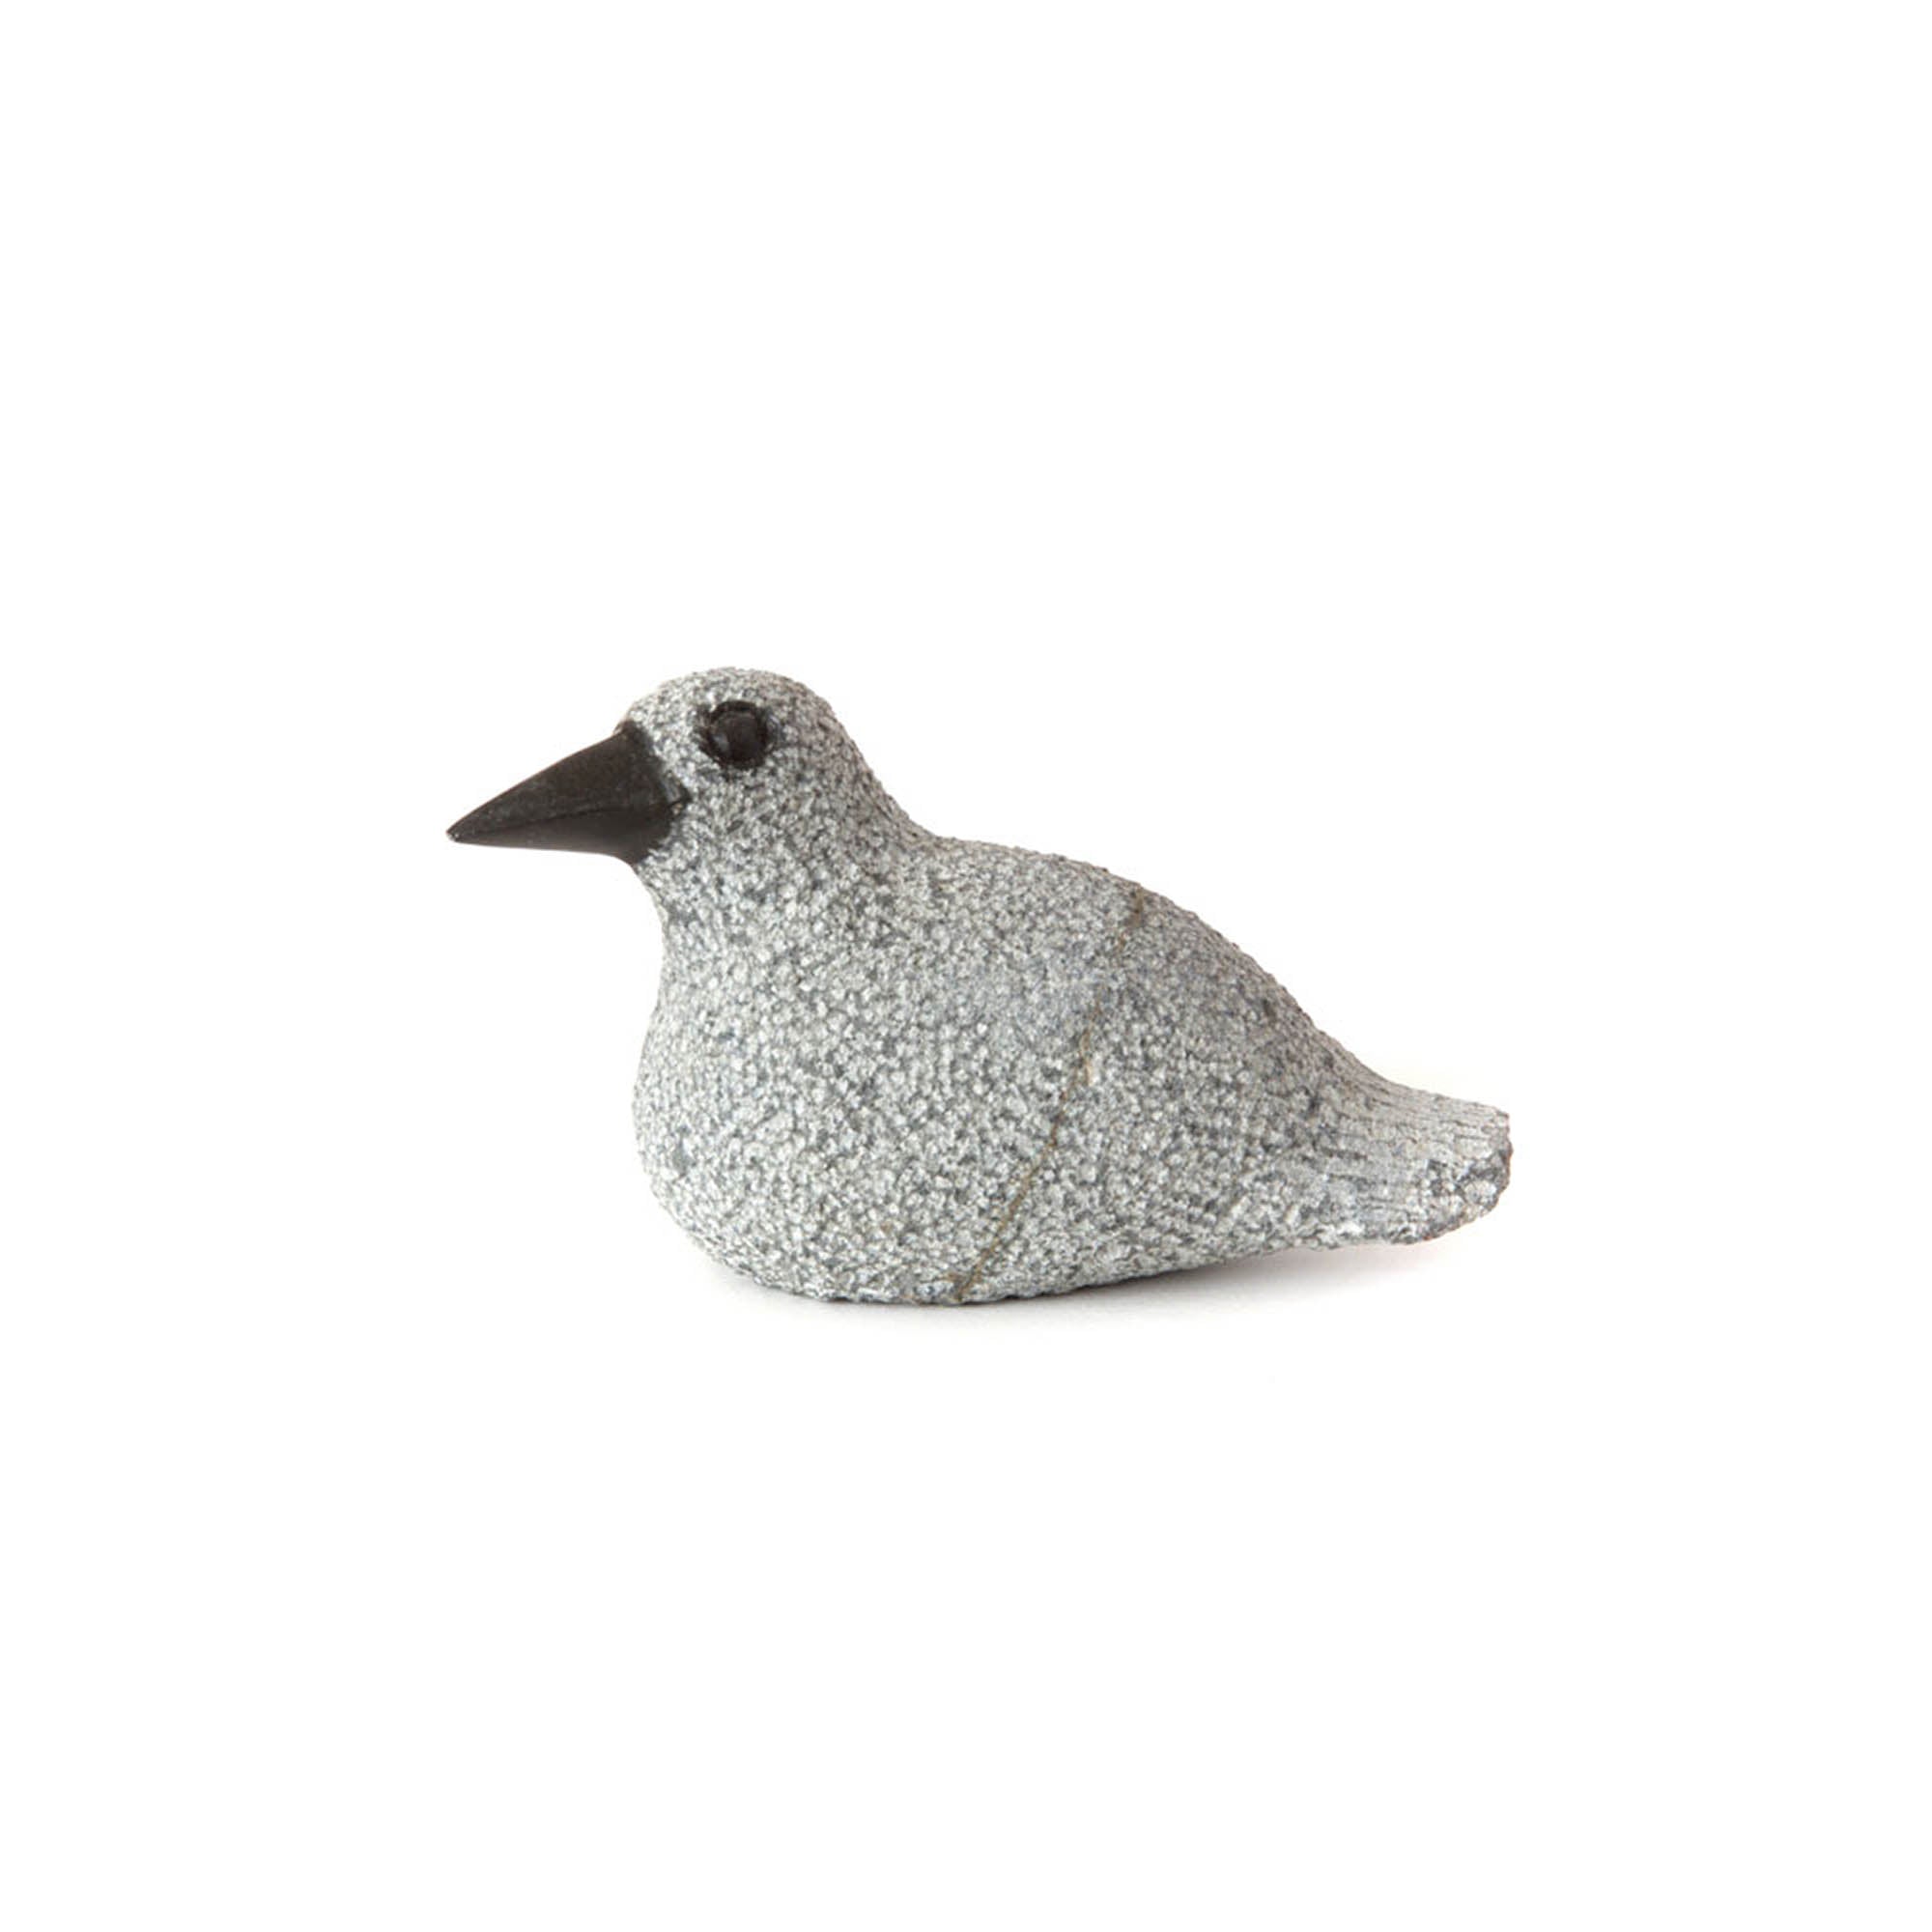 Hand-Carved Stone Duck Sculpture - S